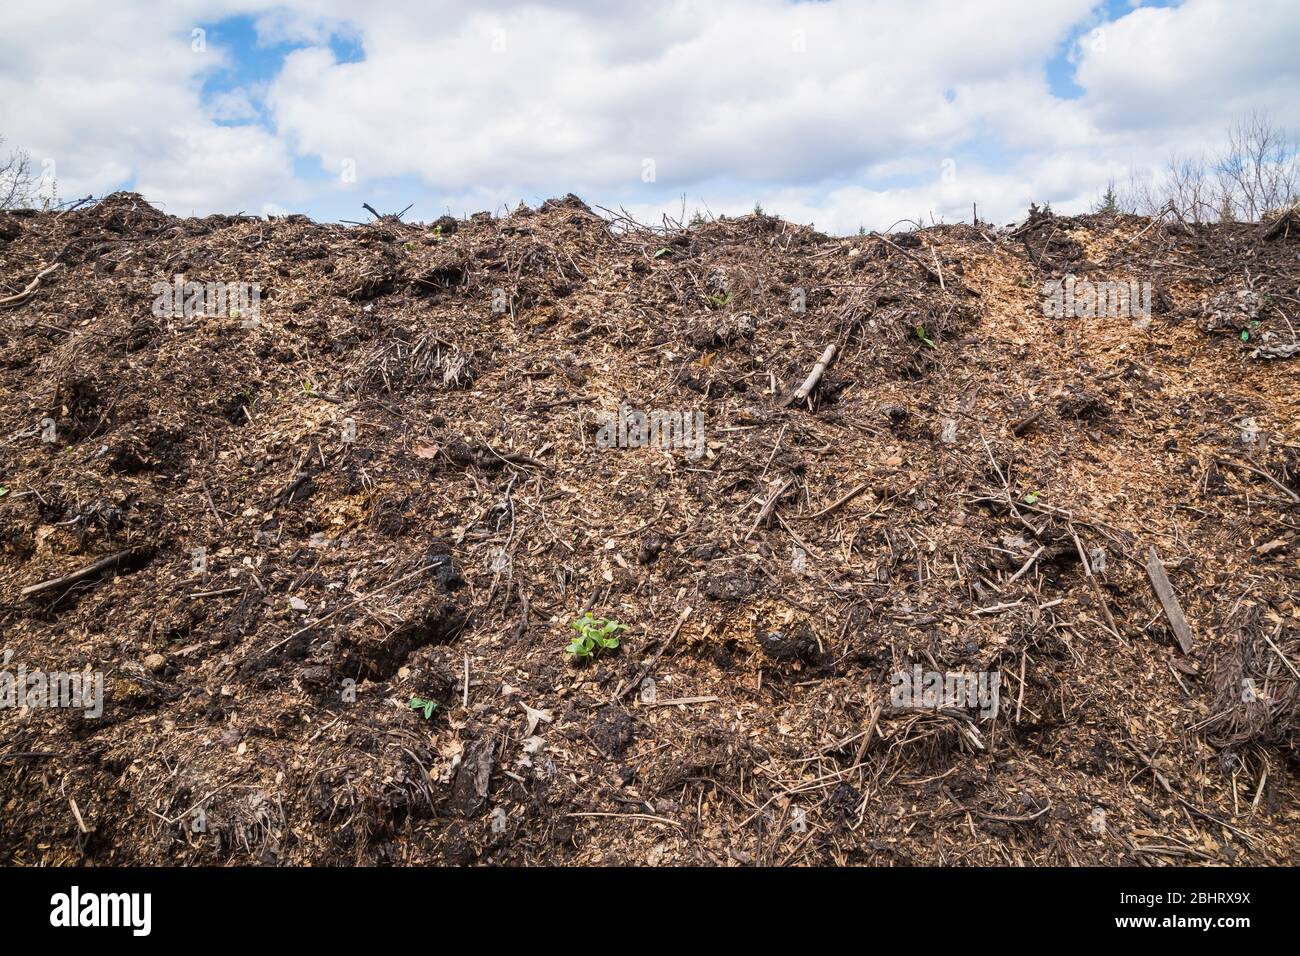 Pile of twigs, branches, leaves and woodchips composting Stock Photo